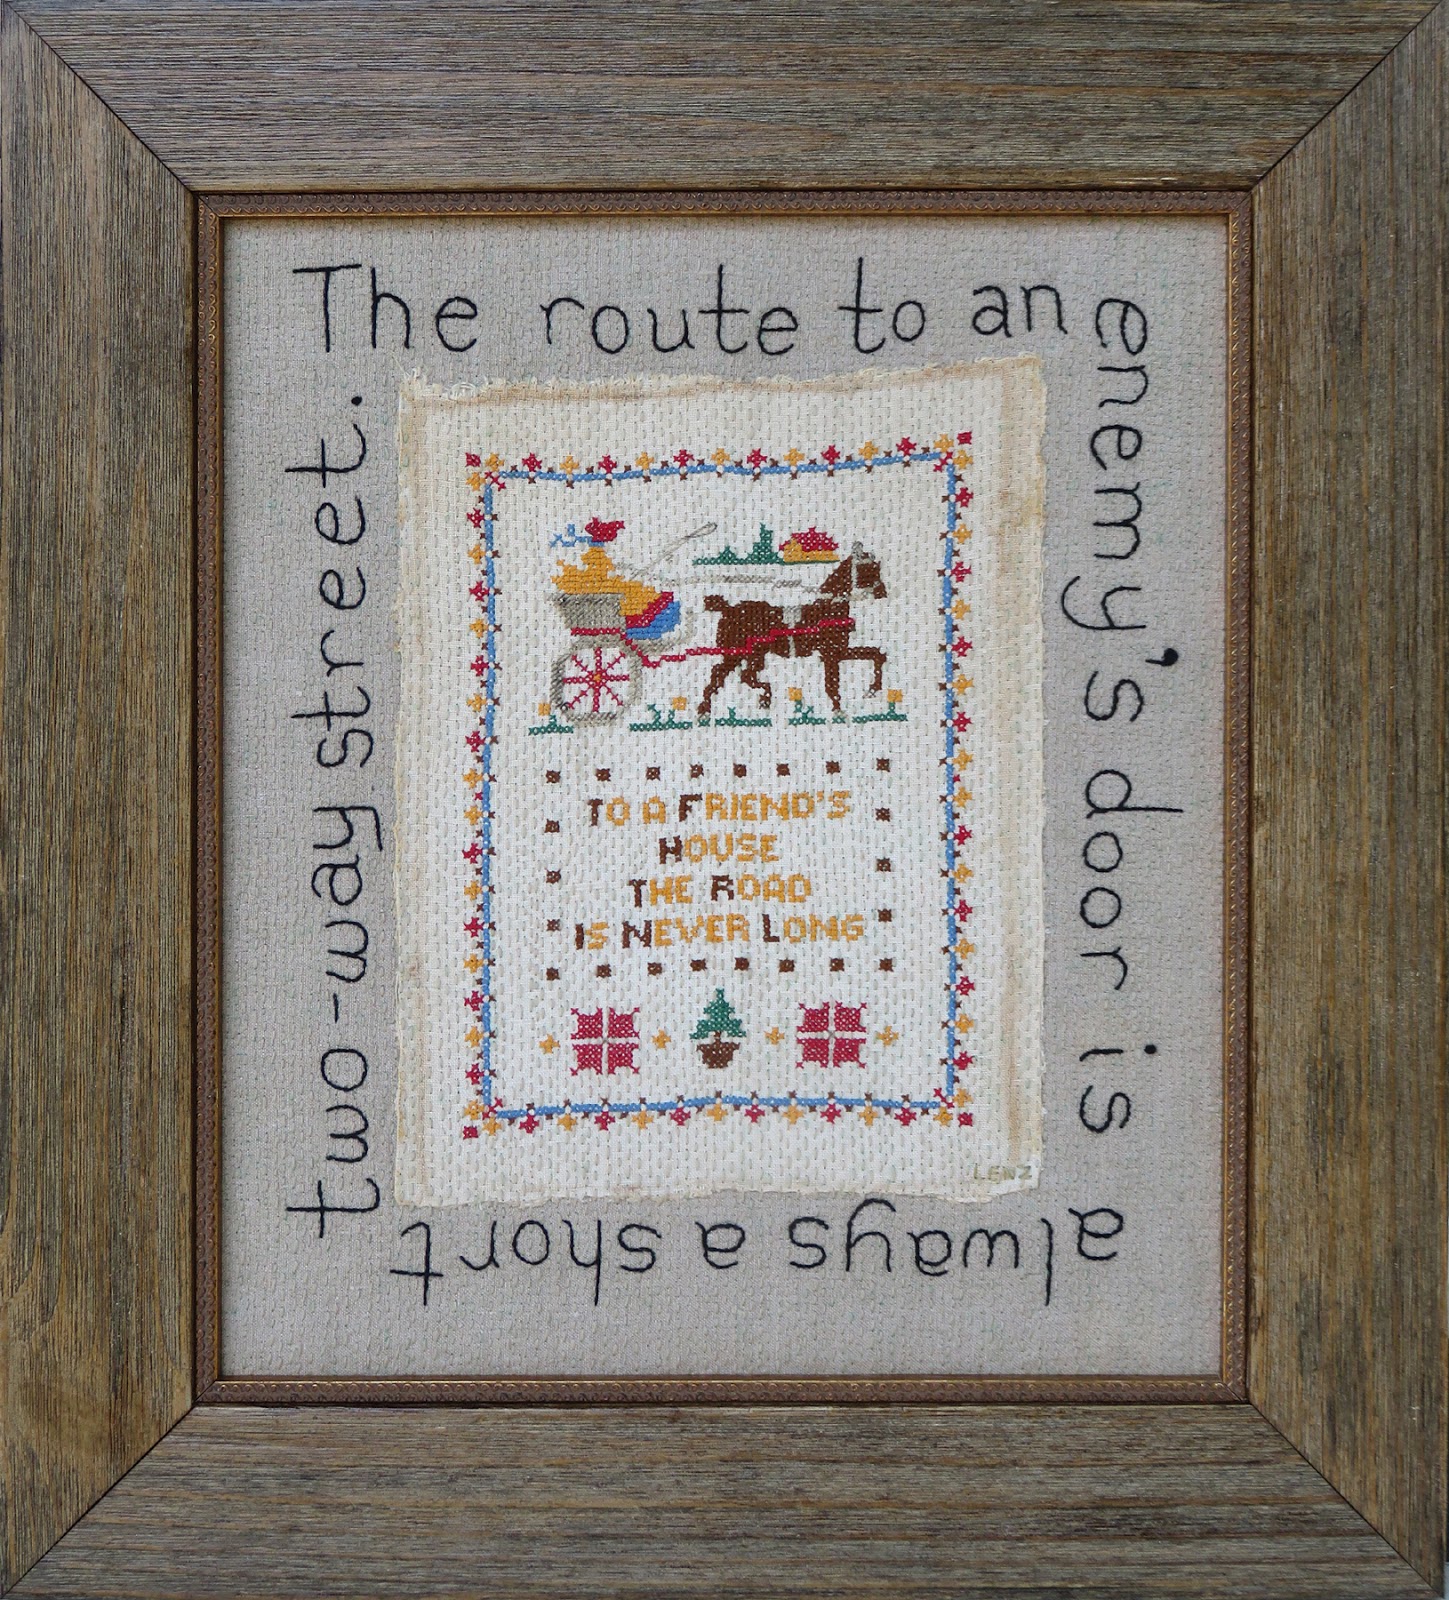 How to Frame a Cross Stitch Project: 3 Ways